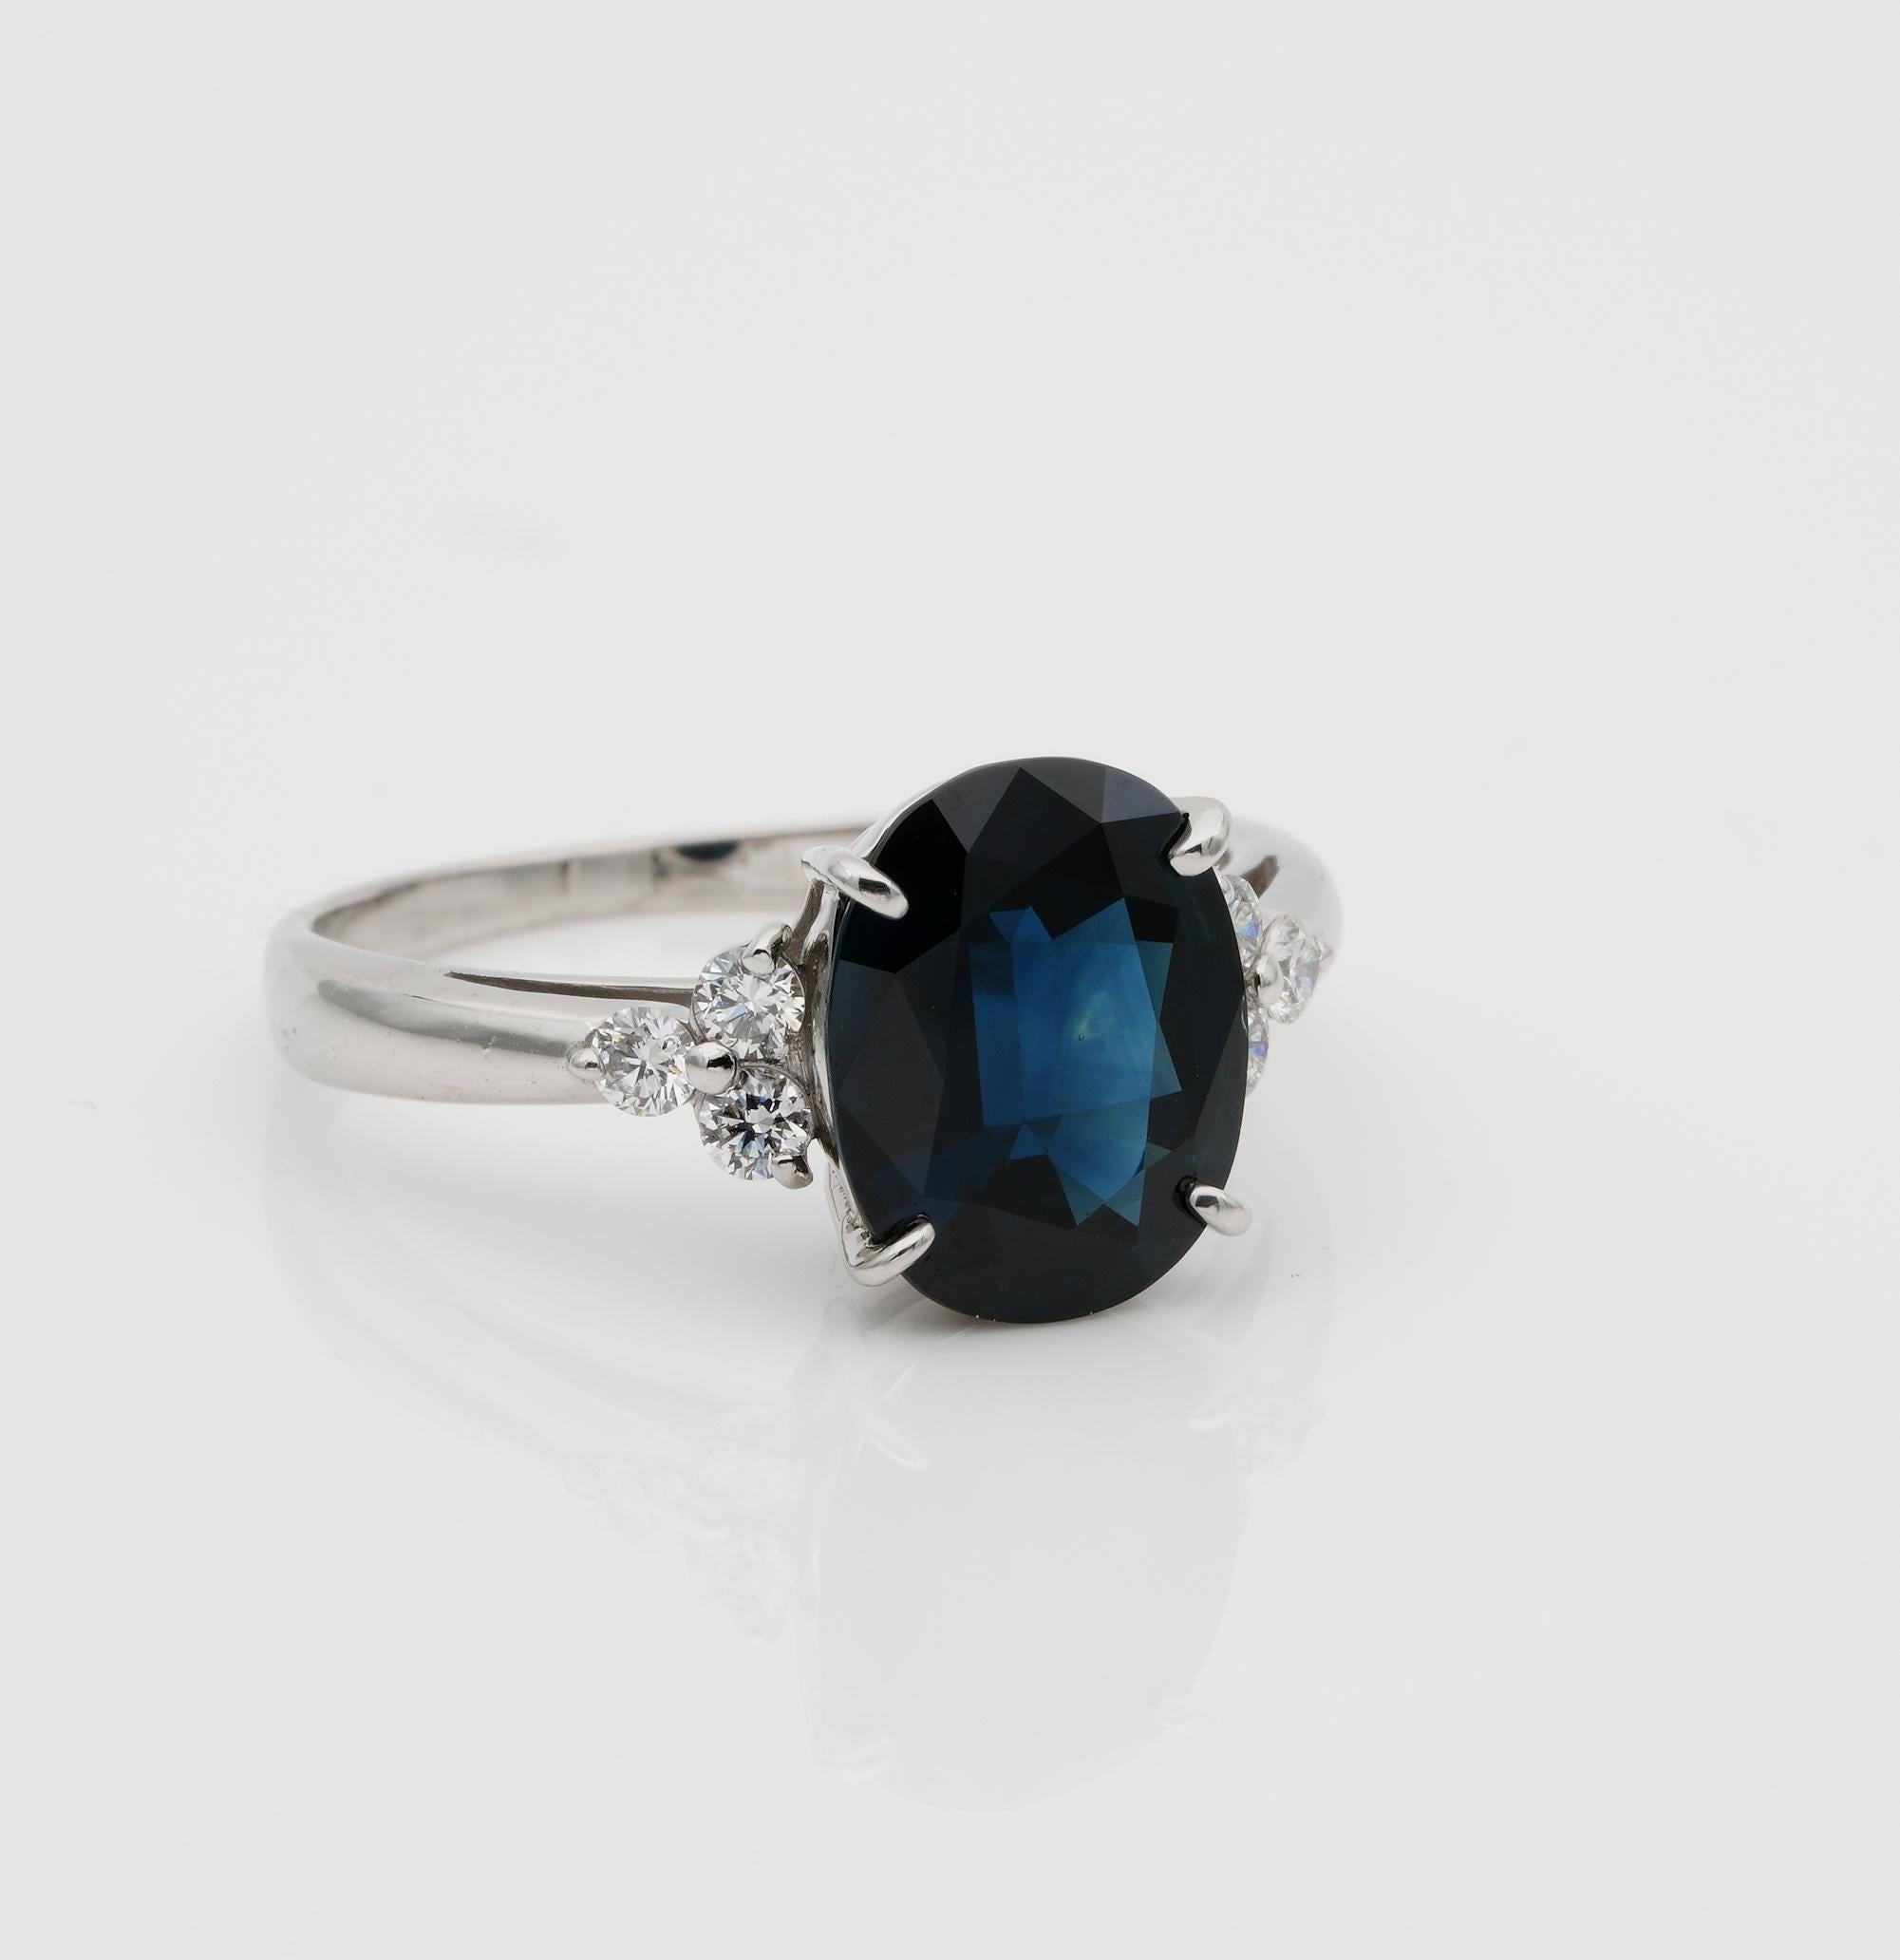 Classy Statement

Striking vintage ring of classy design to stand out for ever
1960 ca – superbly hand crafted of solid Platinum – marked inside together with the Sapphire carat weight and Diamond content all stamped in the shank
The ring boasts